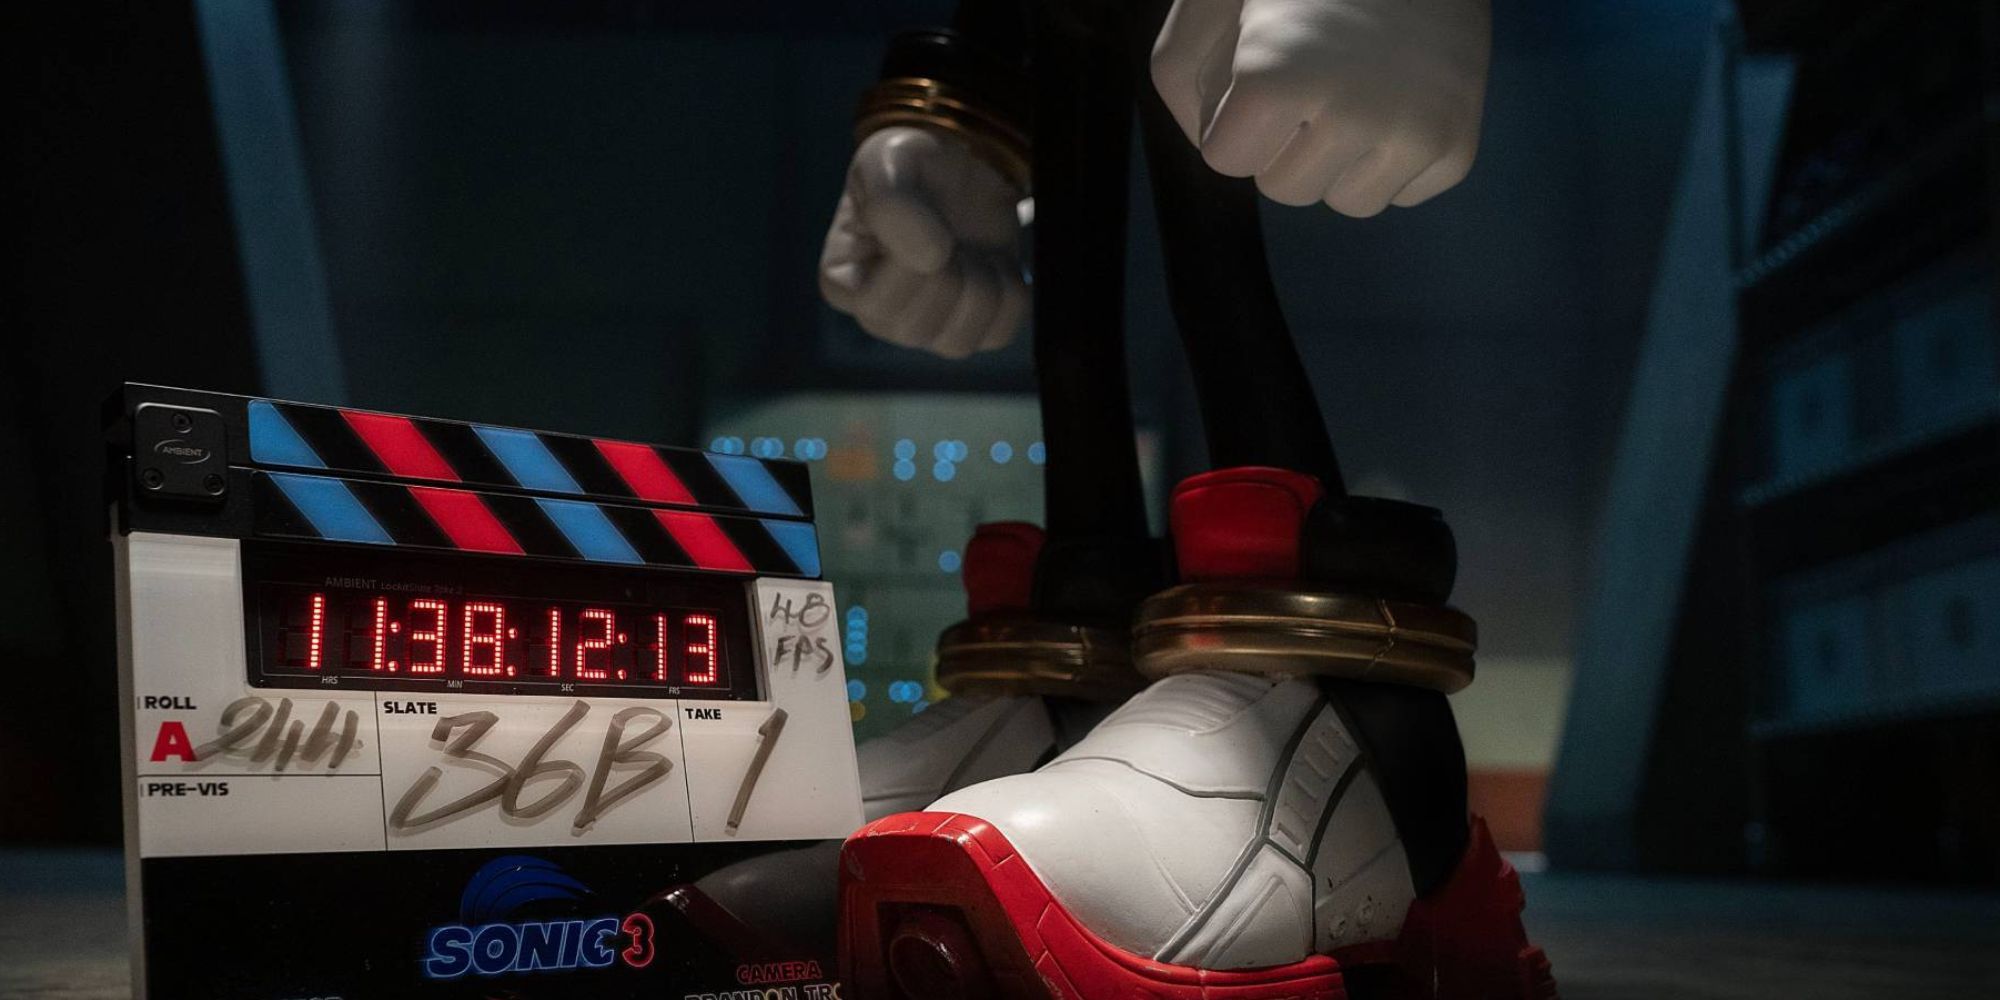 Shadow the Hedgehog's foot and leg in a promotional still for the Sonic 3 movie. He's stood next to a clapperboard